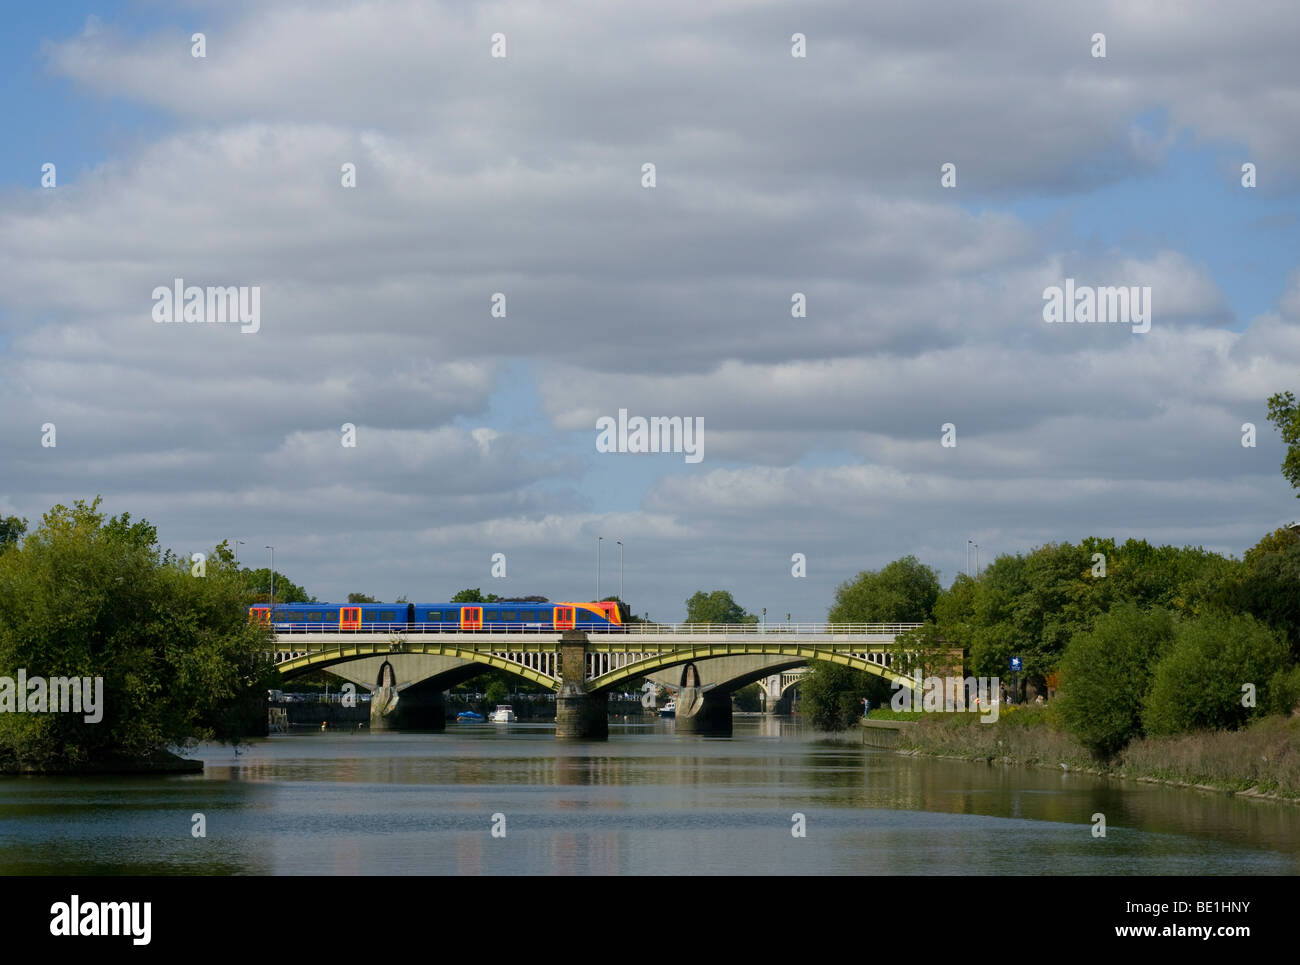 South West Trains Train Crossing The River Thames At Richmond Surrey England Stock Photo